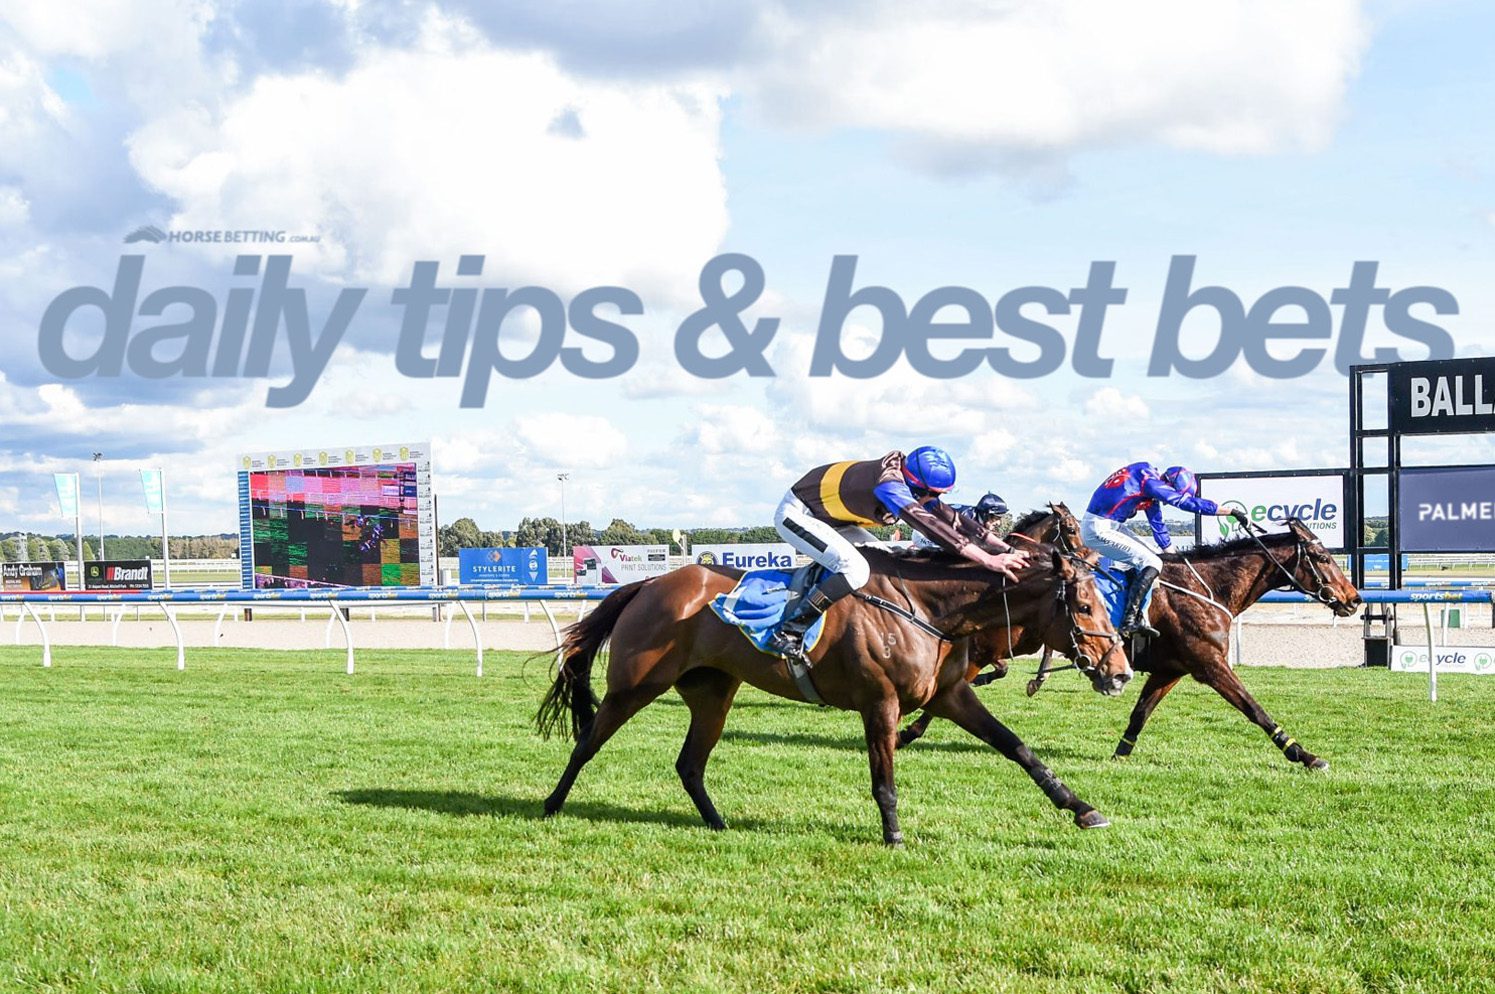 Monday horse racing tips & best bets 